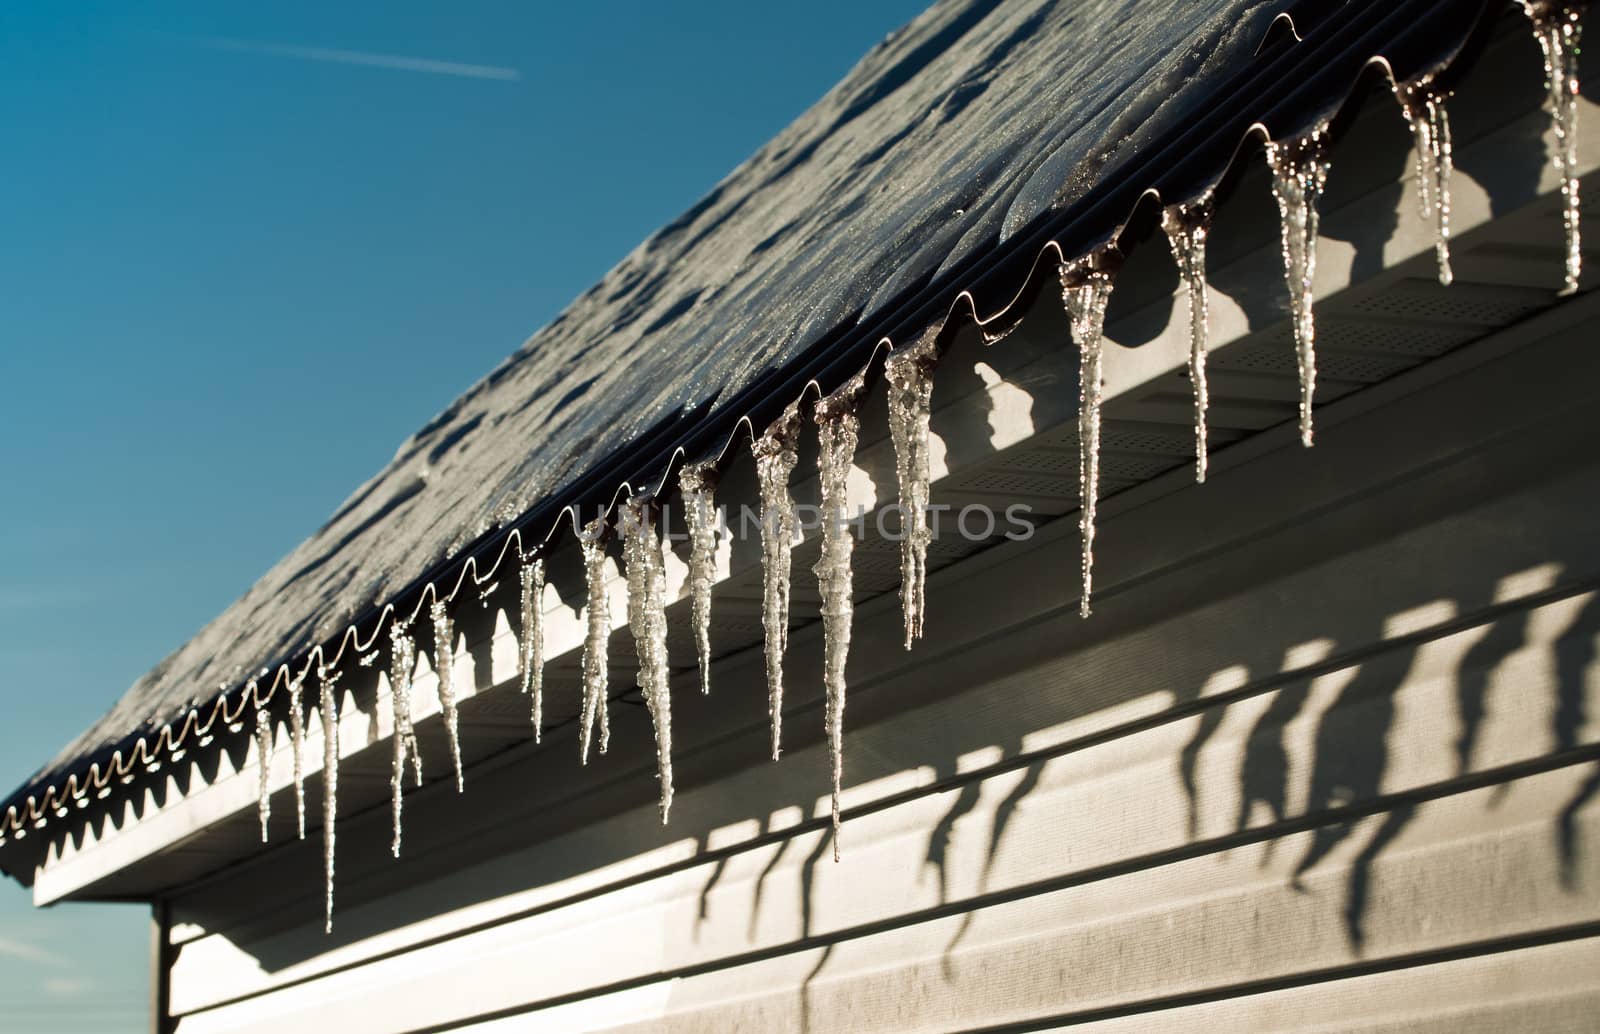 Melting icicles on the roof